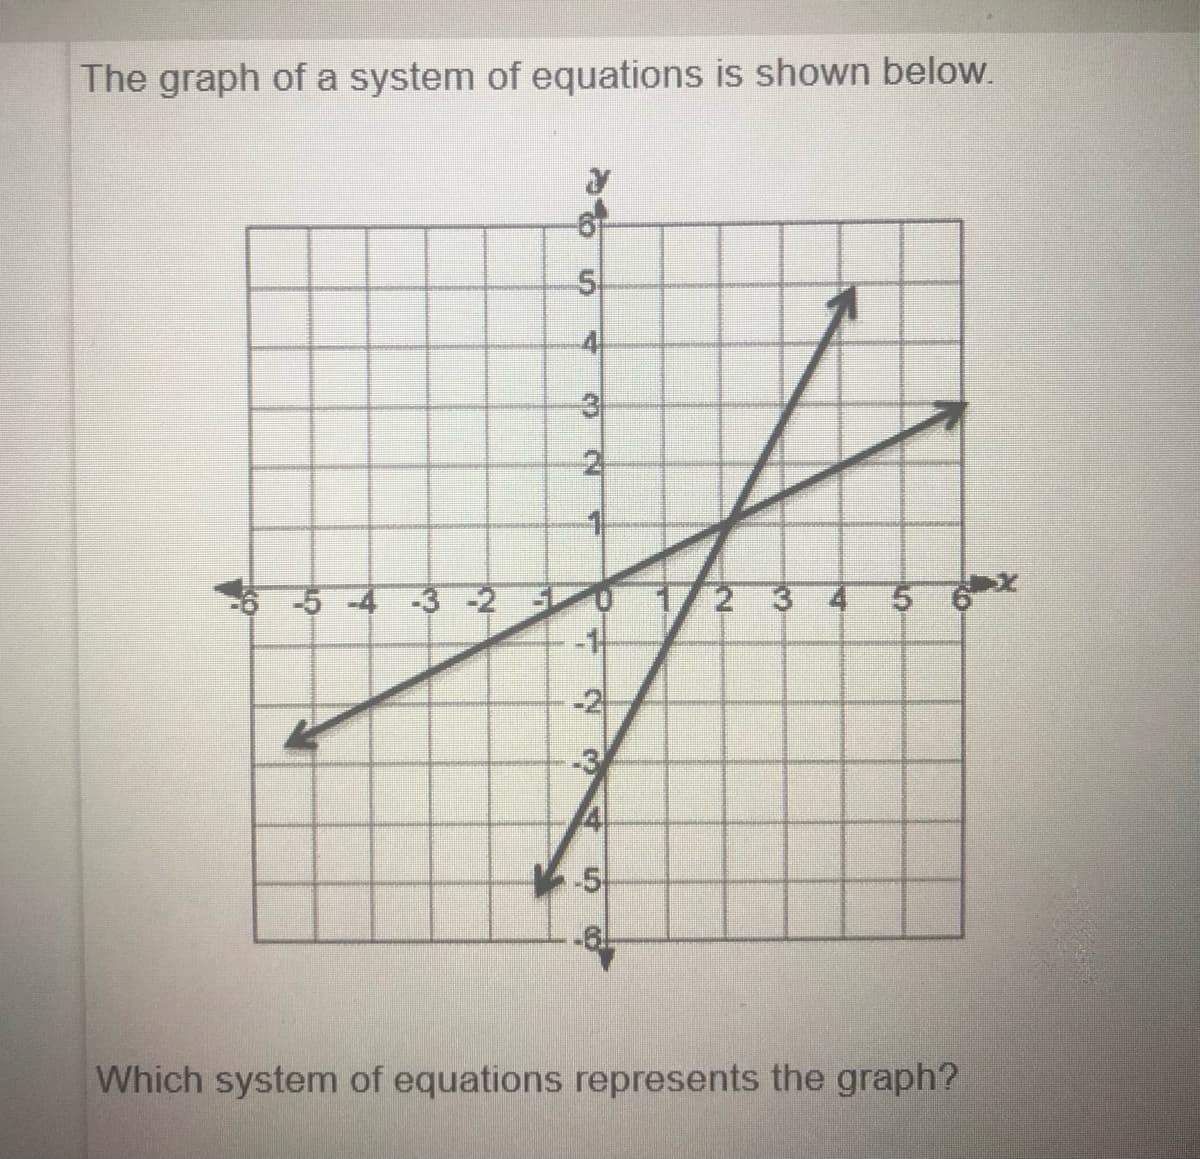 The graph of a system of equations is shown below.
44
3
2 3 4 5 6
-1
-4 -3 -2 5
-2
5
Which system of equations represents the graph?
S.
